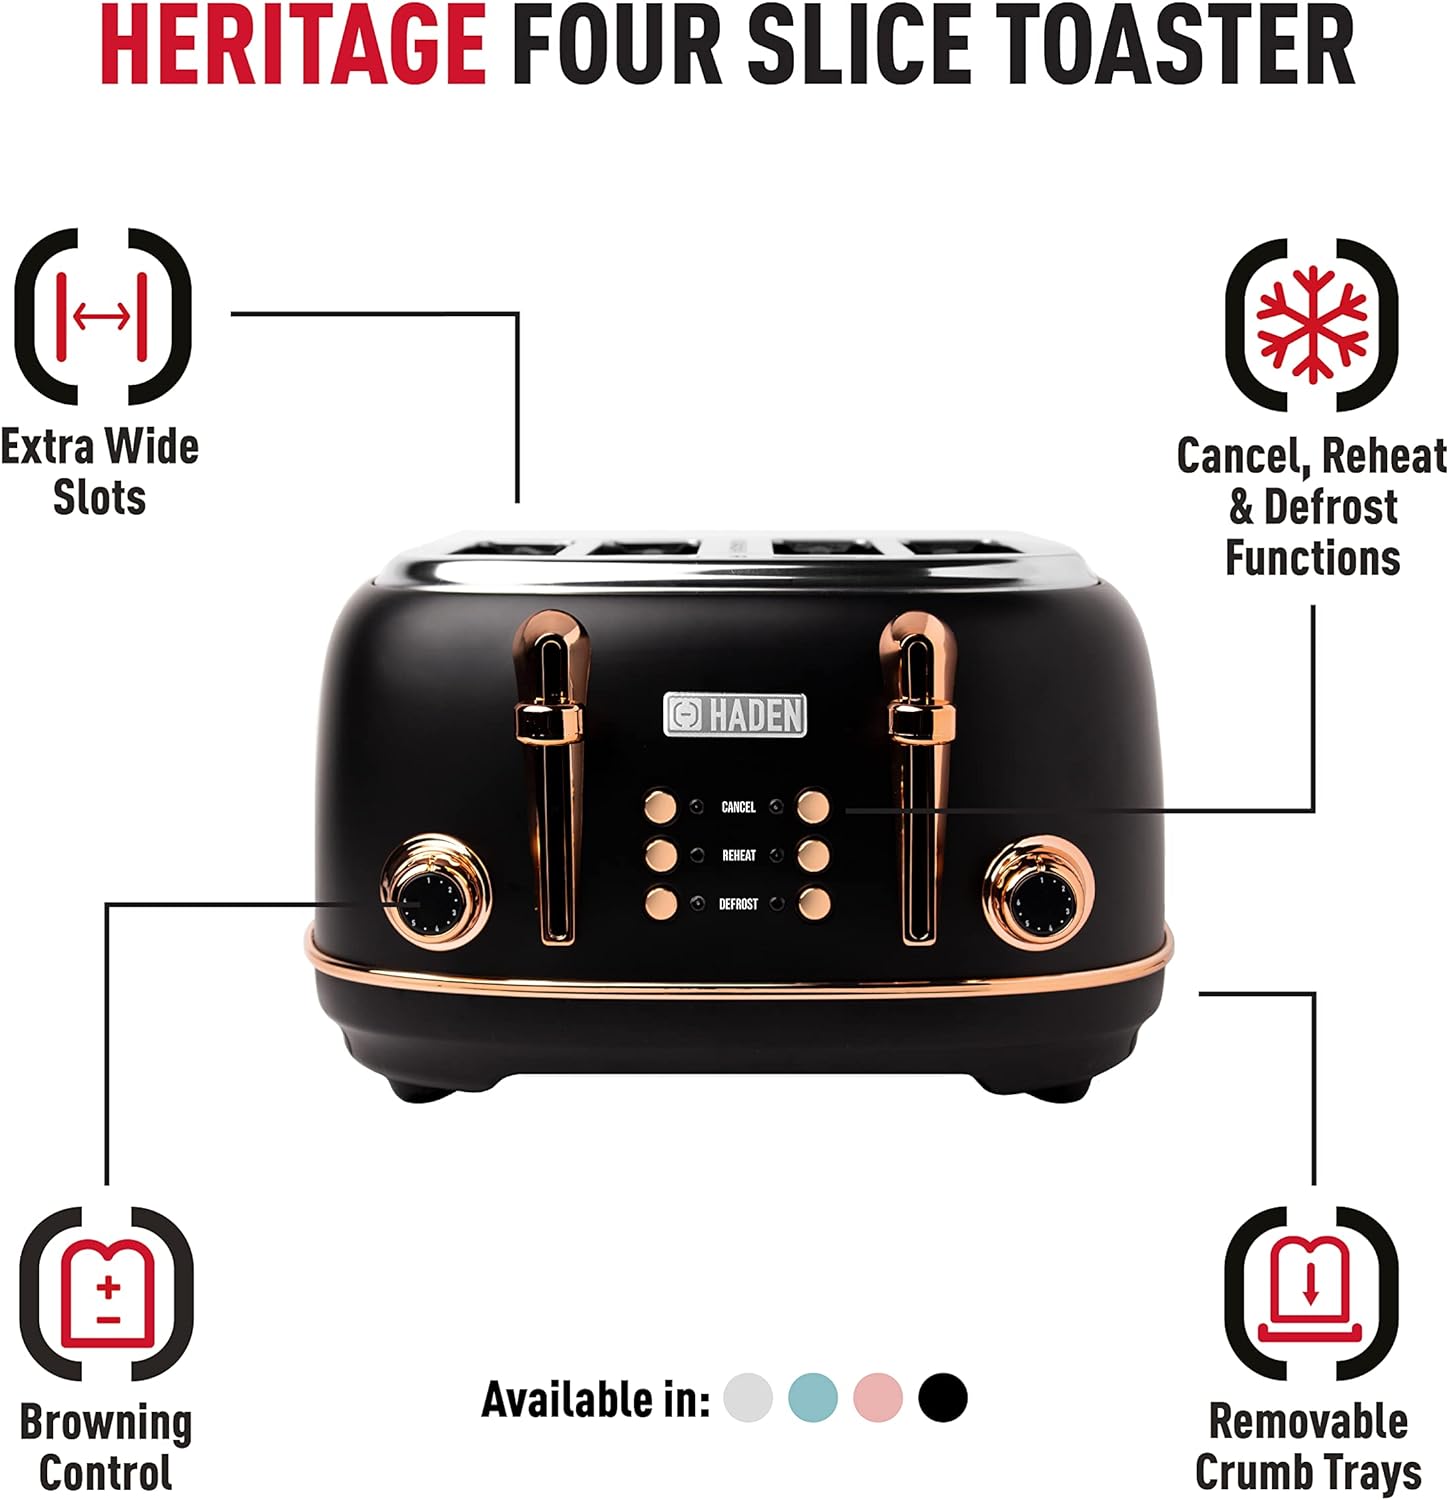 Haden Heritage White 2 Slice Toaster - Electric Stainless Steel Toaster - Economy Mode - Reheat, Cancel and Defrost Functions - Variable Browning Control - 1370-1630W